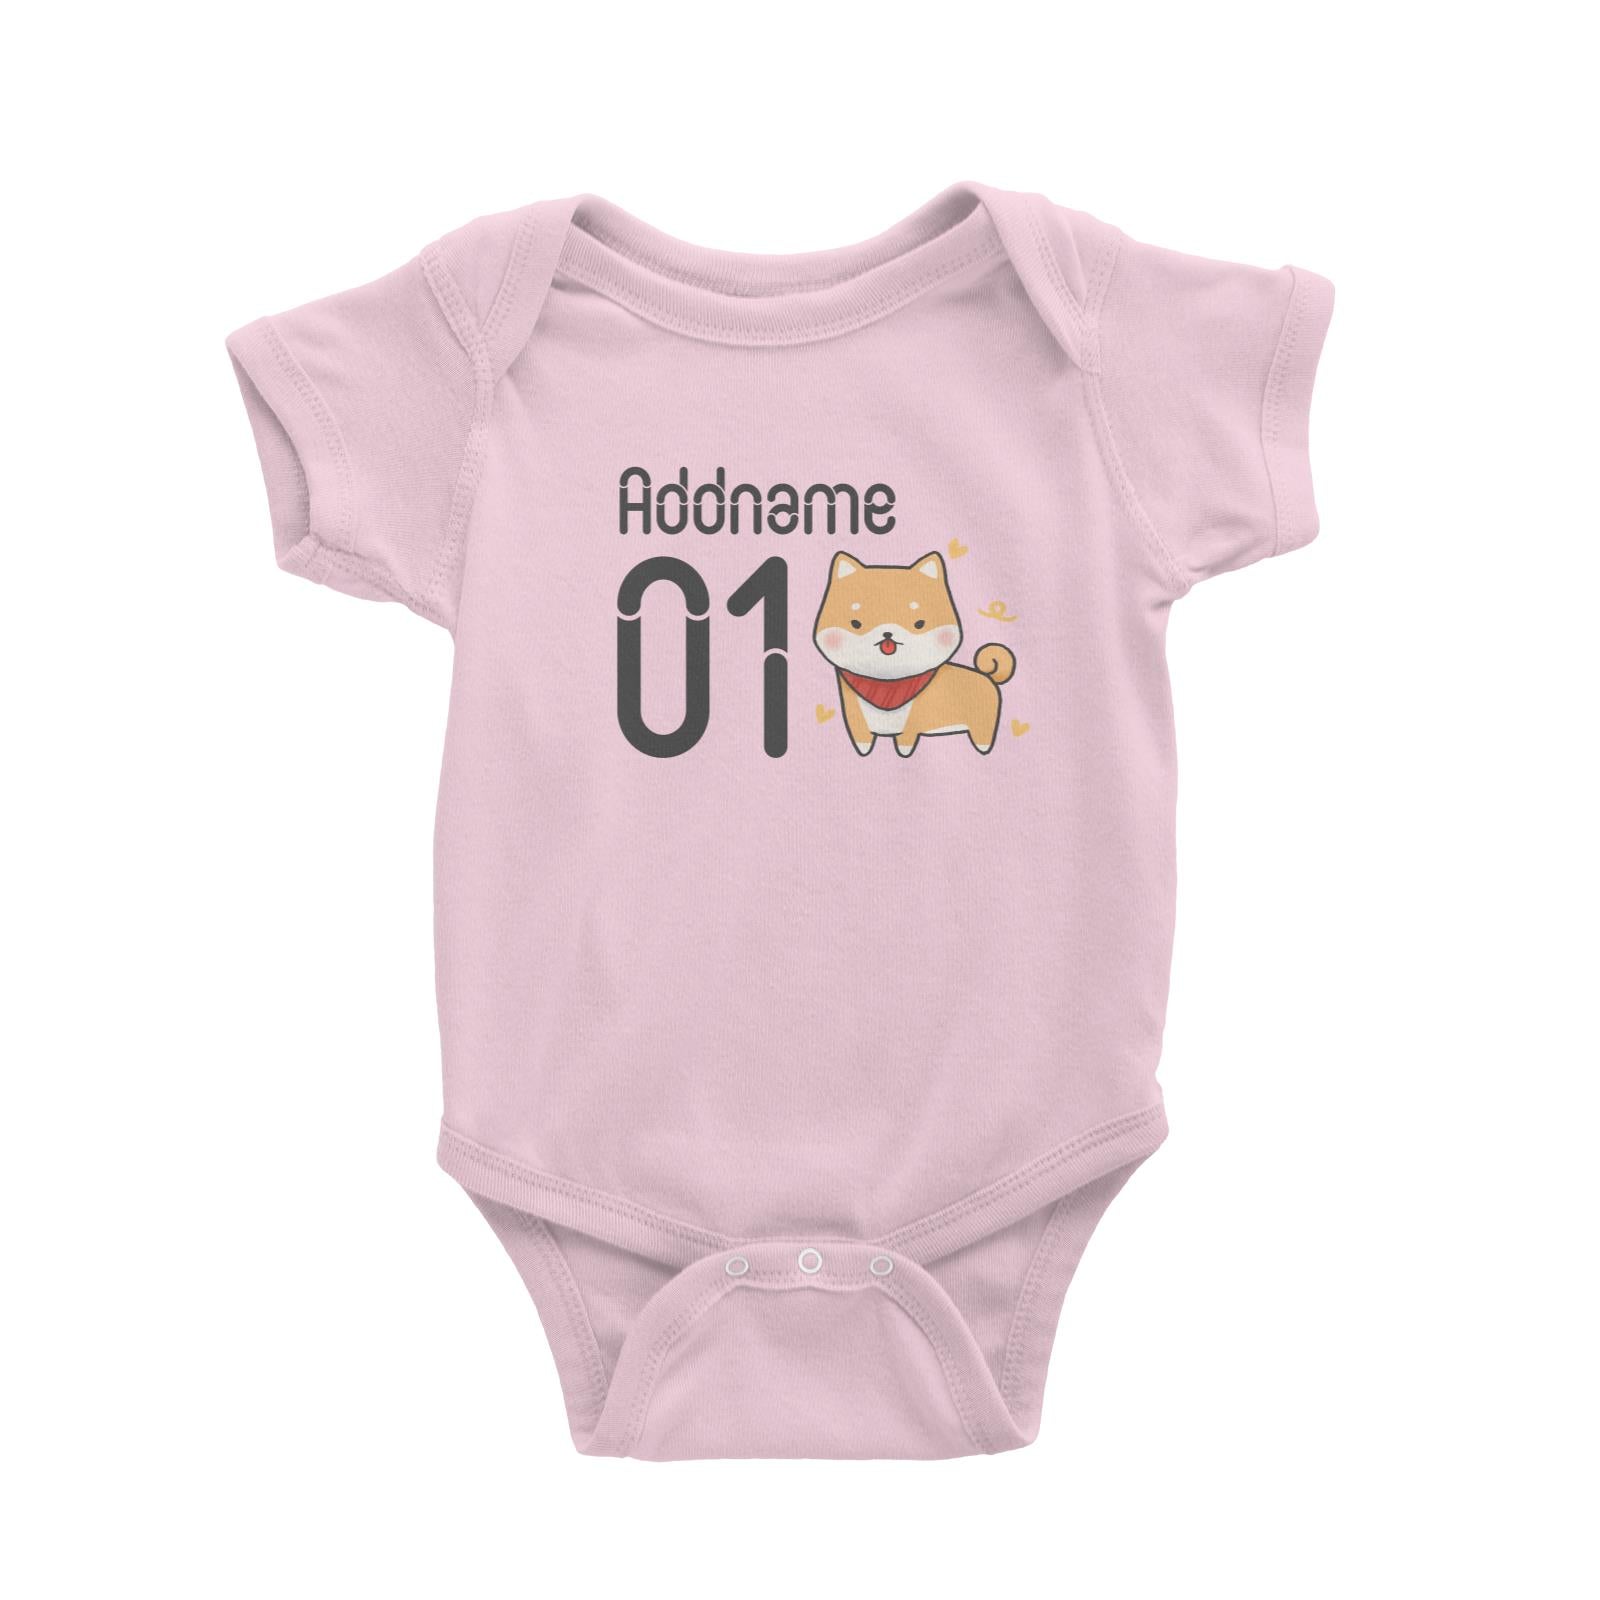 Name and Number Cute Hand Drawn Style Shiba Inu Baby Romper